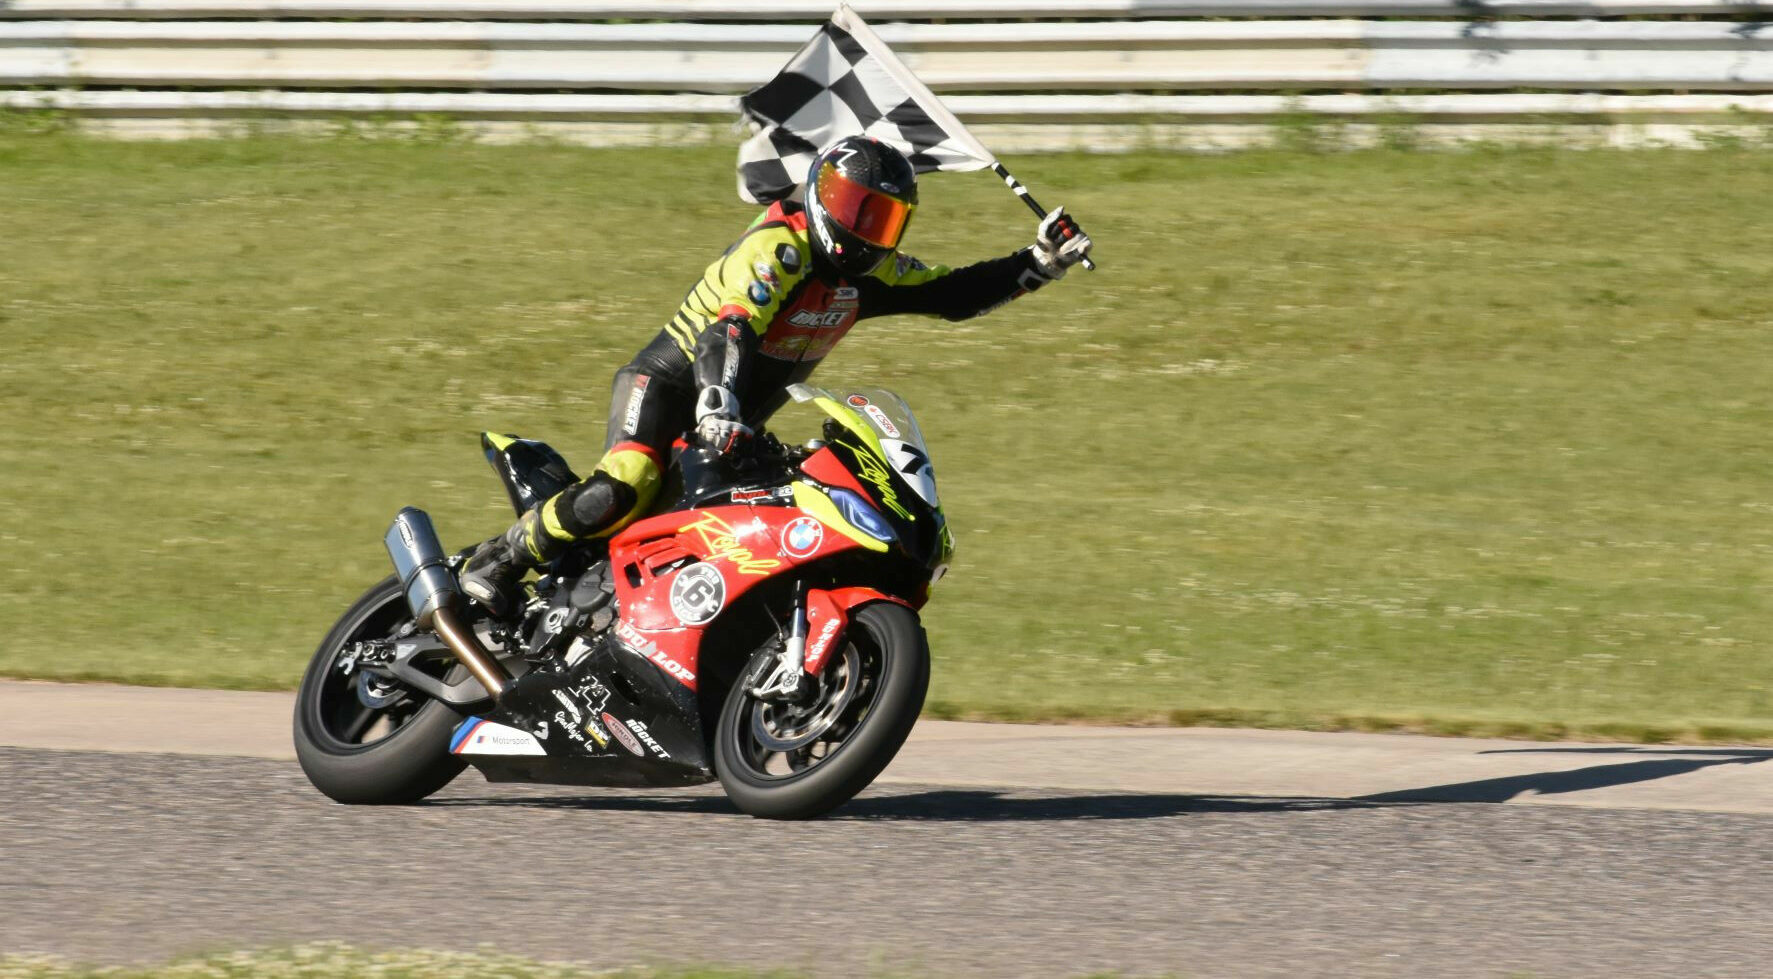 Michael Leon (74) celebrating his victory at Calabogie Motorsports Park. Photo by Colin Fraser, courtesy PMP.